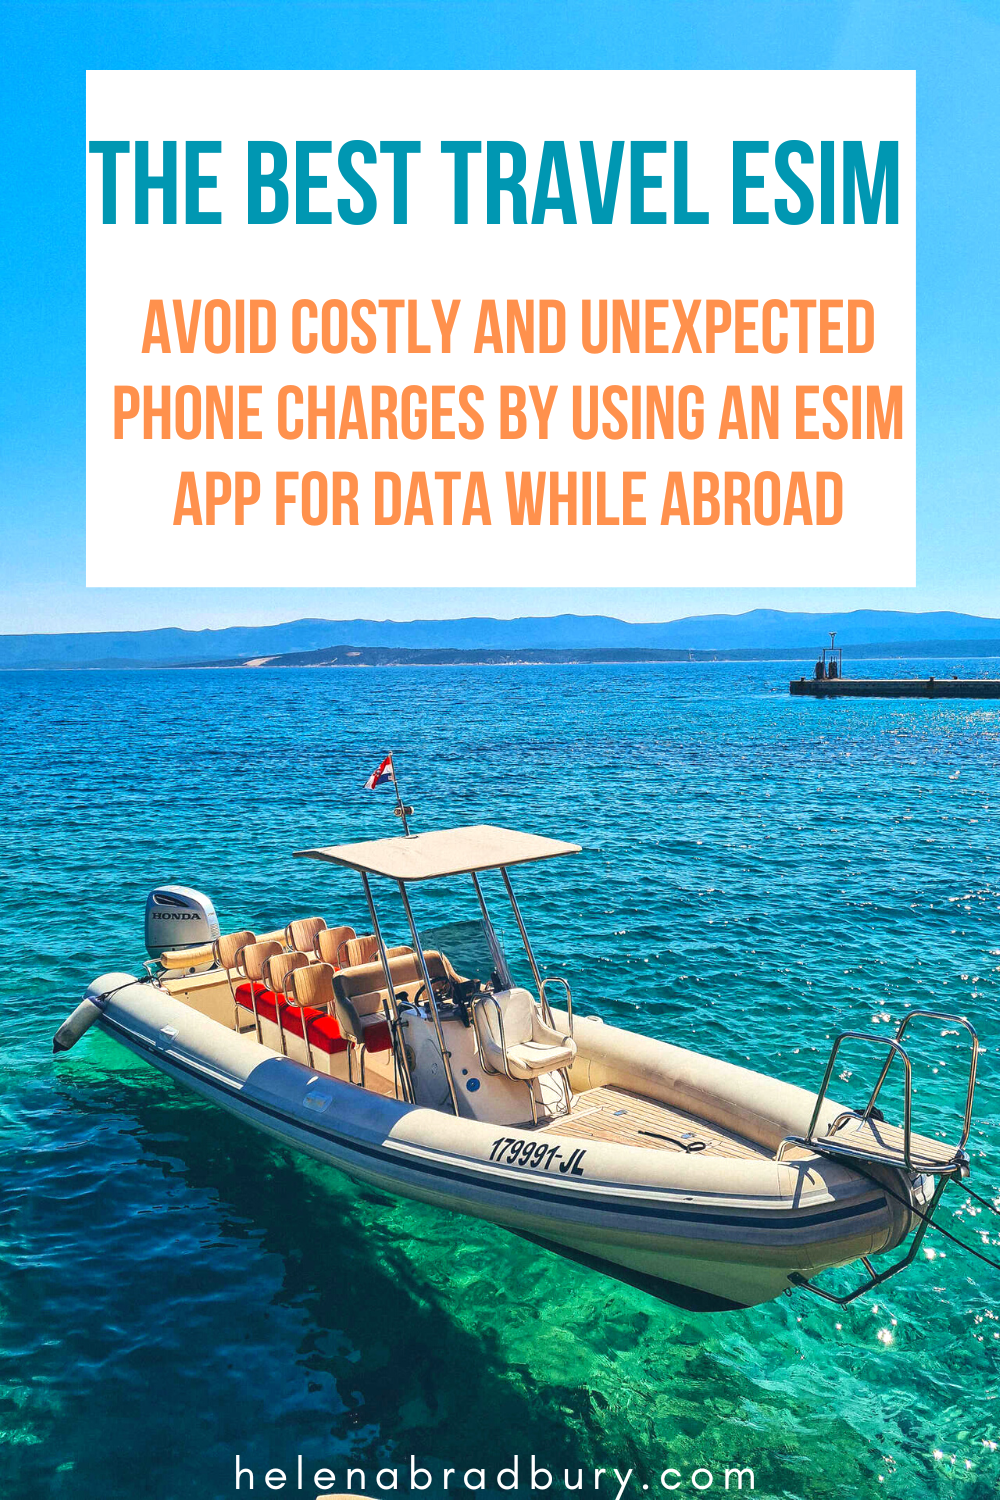 Don’t get surprised by unexpected phone bills for your international data usage. Find the best eSim for international travel so you can stay connected. | international data phone | roaming data | best esim plans for travel | best esim app | best roam